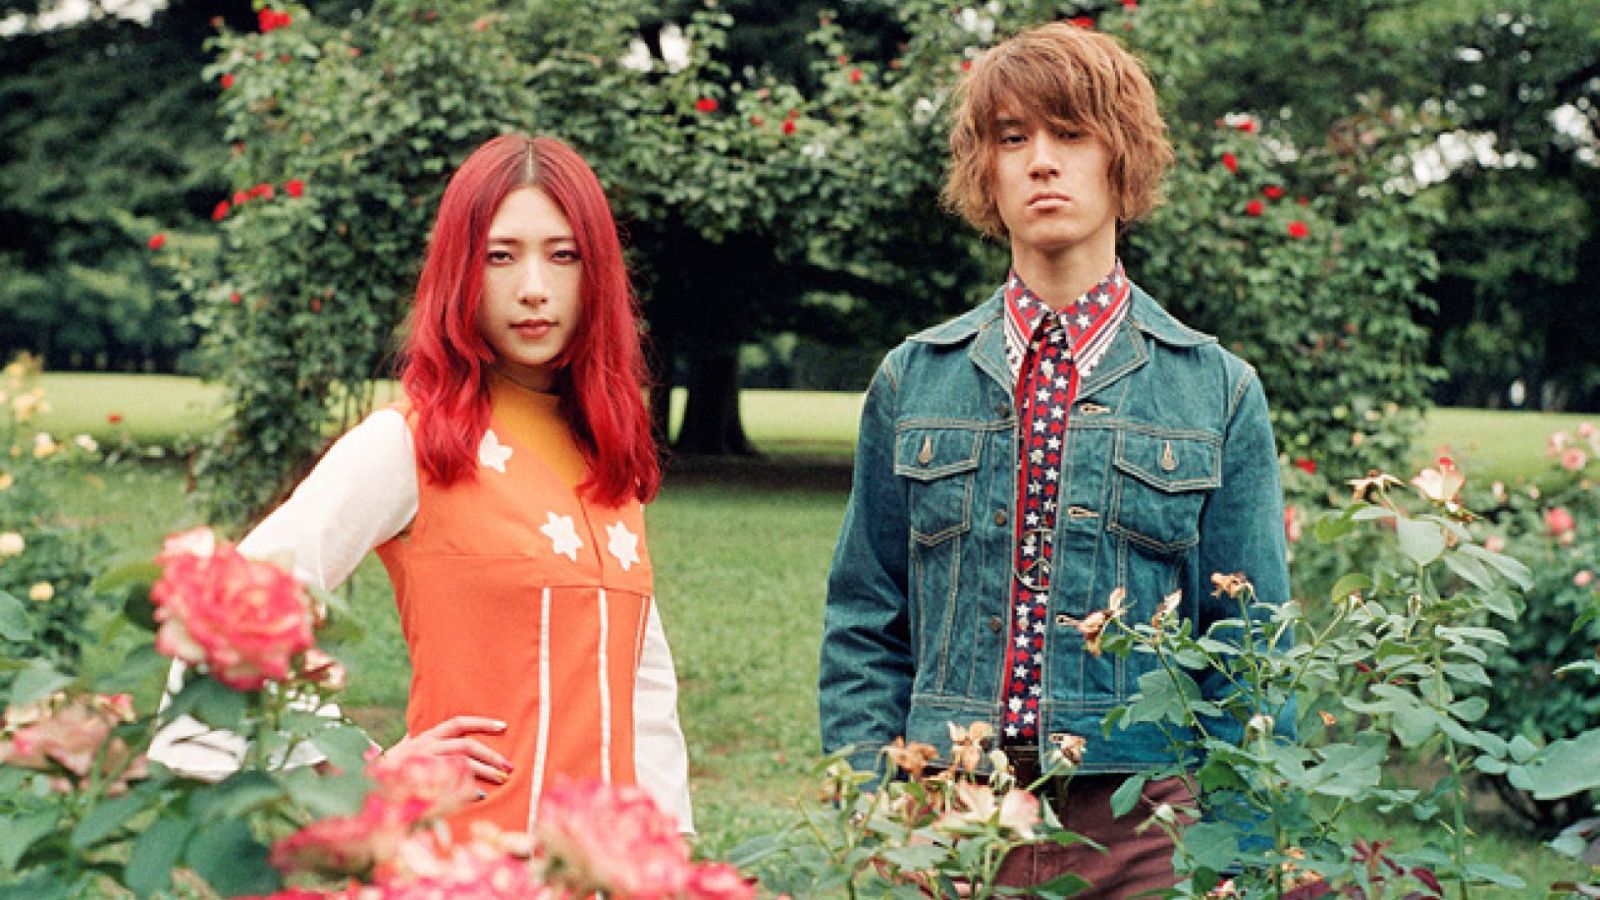 GLIM SPANKY © UNIVERSAL MUSIC LLC. All rights reserved.